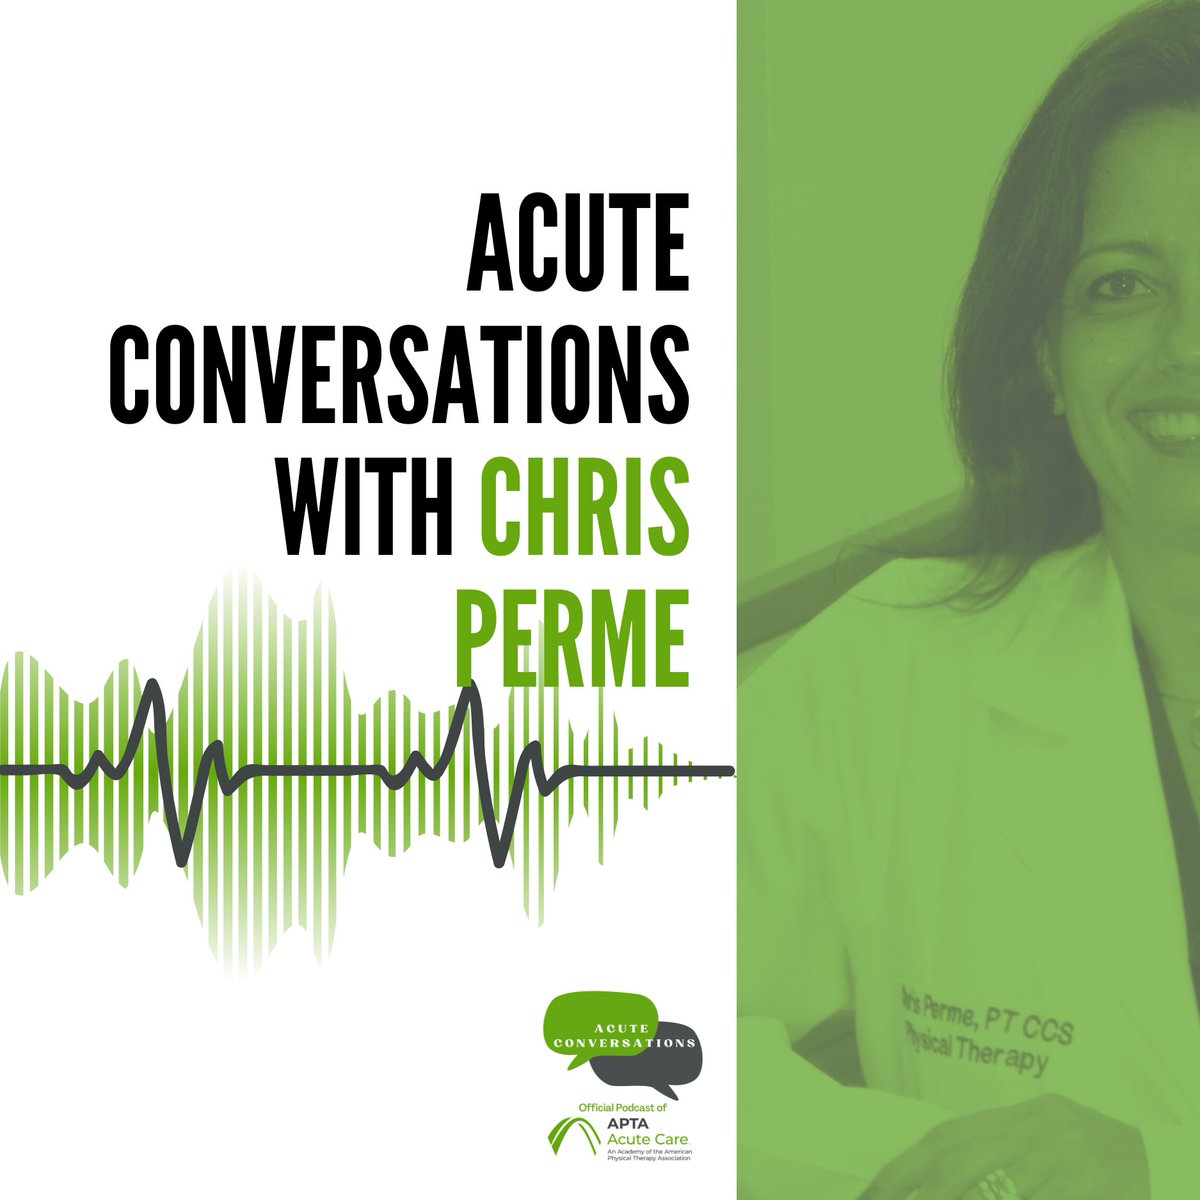 🚨 New Episode Alert! 🚨 Today @IcuPerme shares her extraordinary journey of bringing ICU rehab techniques to Ukraine. See how one woman's expertise can change lives across the globe. Don’t miss this powerful story! 🌟 #AcuteConversations #ICURehab tiny.cc/or00yz